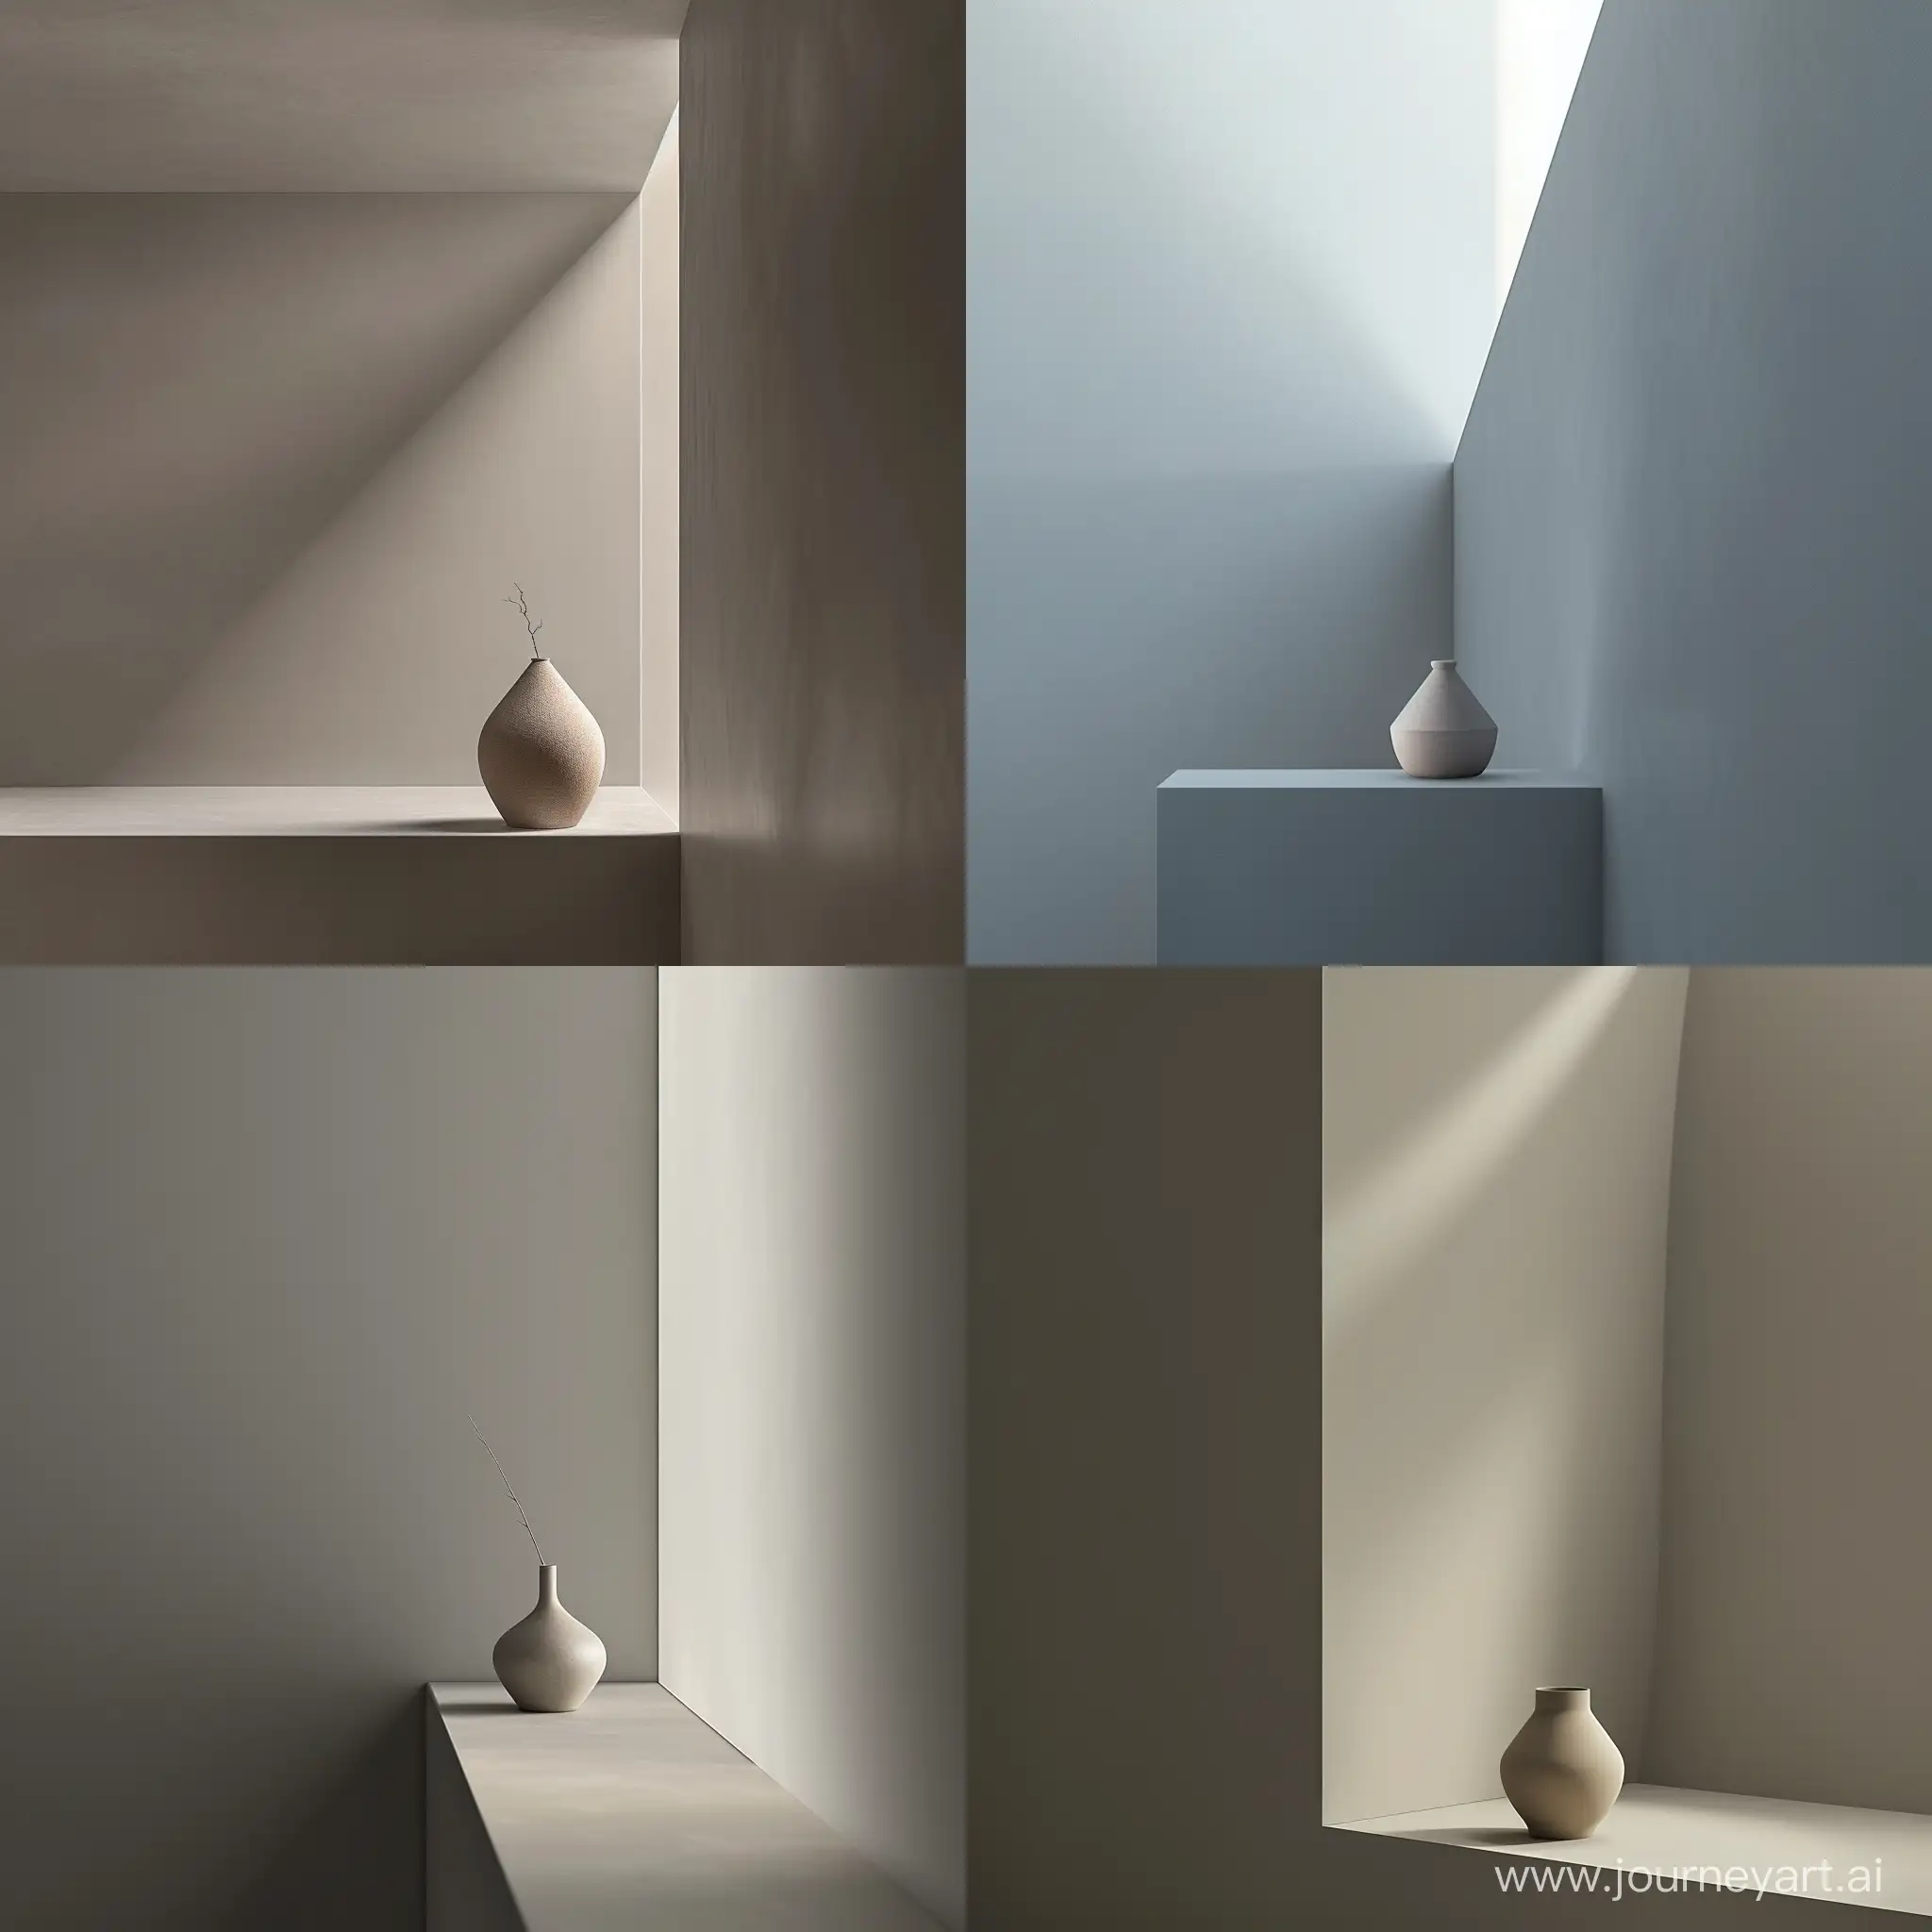 Imagine a minimalist interior scene featuring a room with smooth gray walls that converge at the top corner. A delicate, small vase sits gracefully on a narrow ledge, with bottom to top view, Without showing the light source.